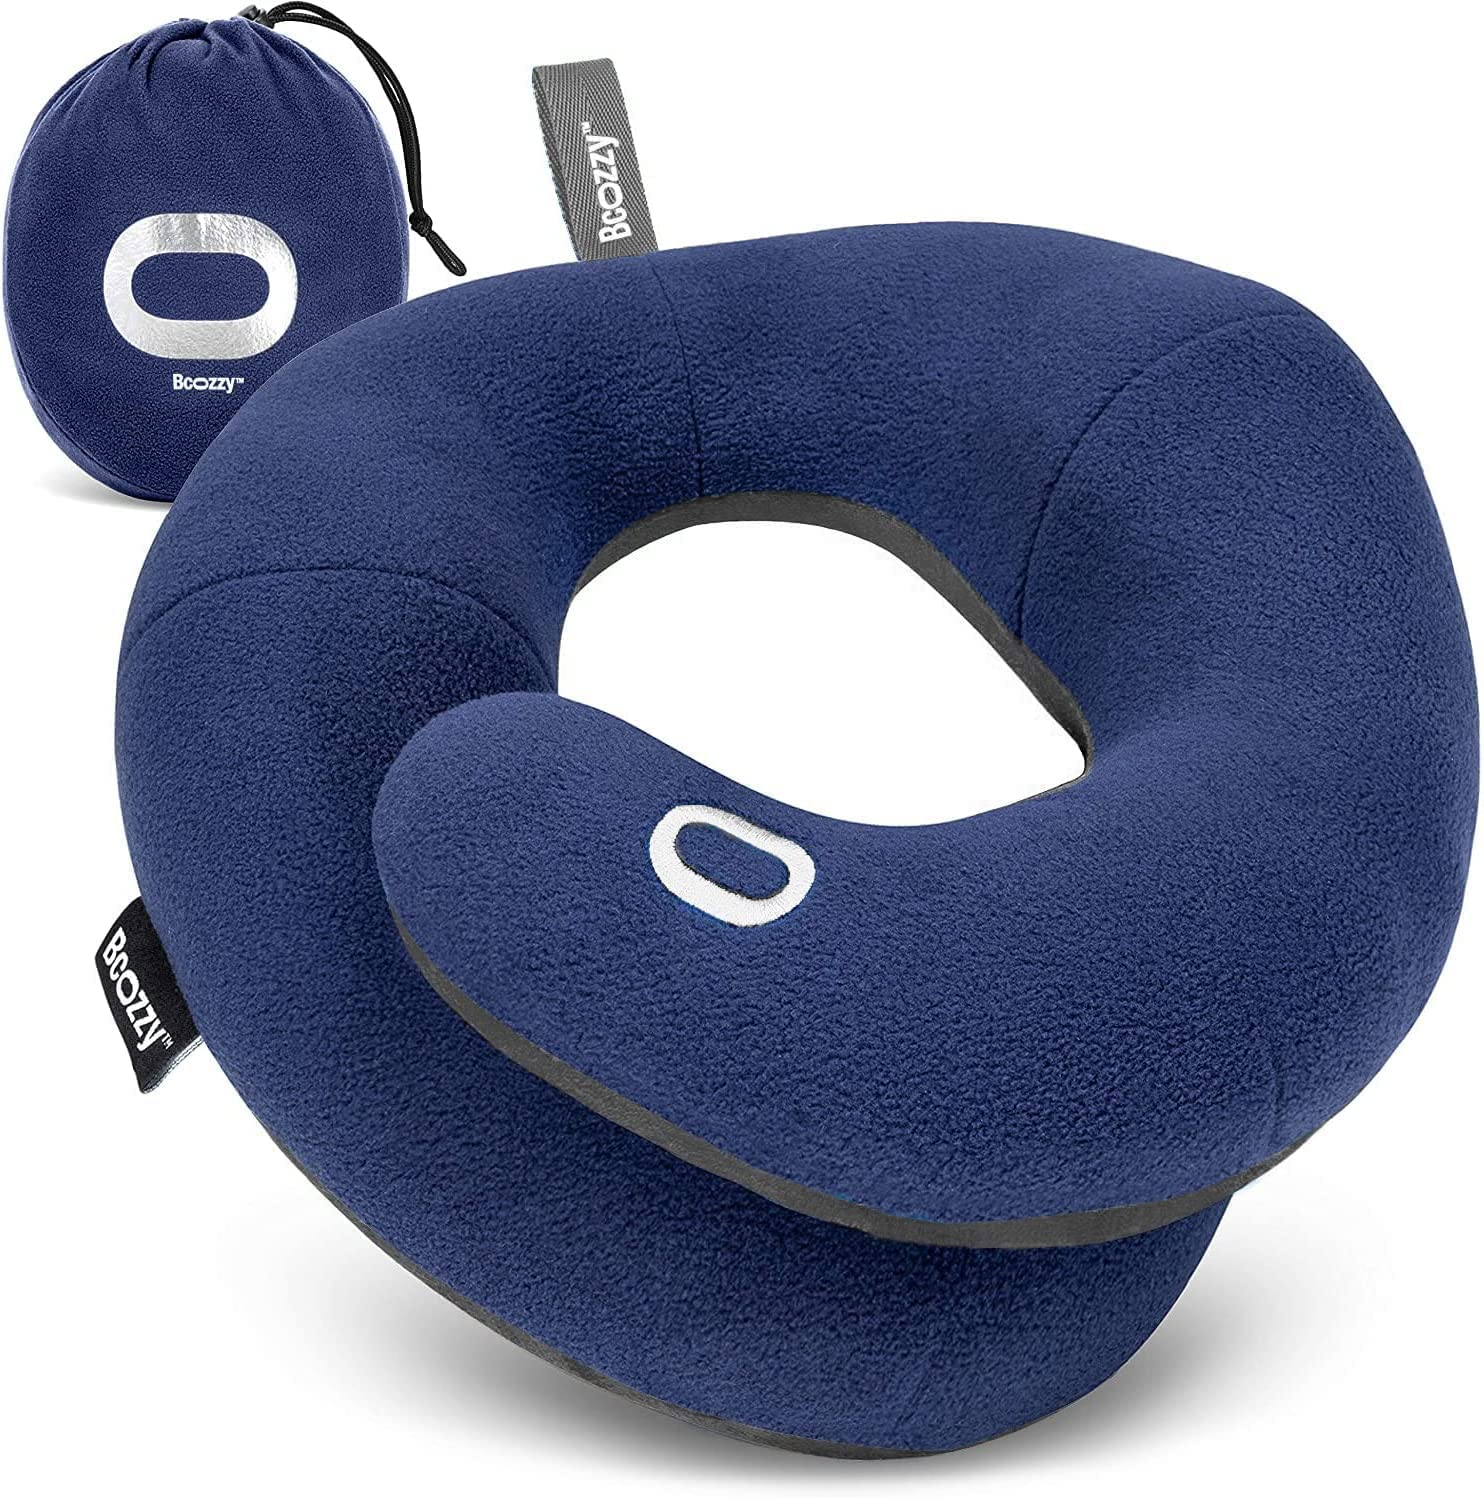 BCOZZY Balanced Chin Supporting Neck Pillow